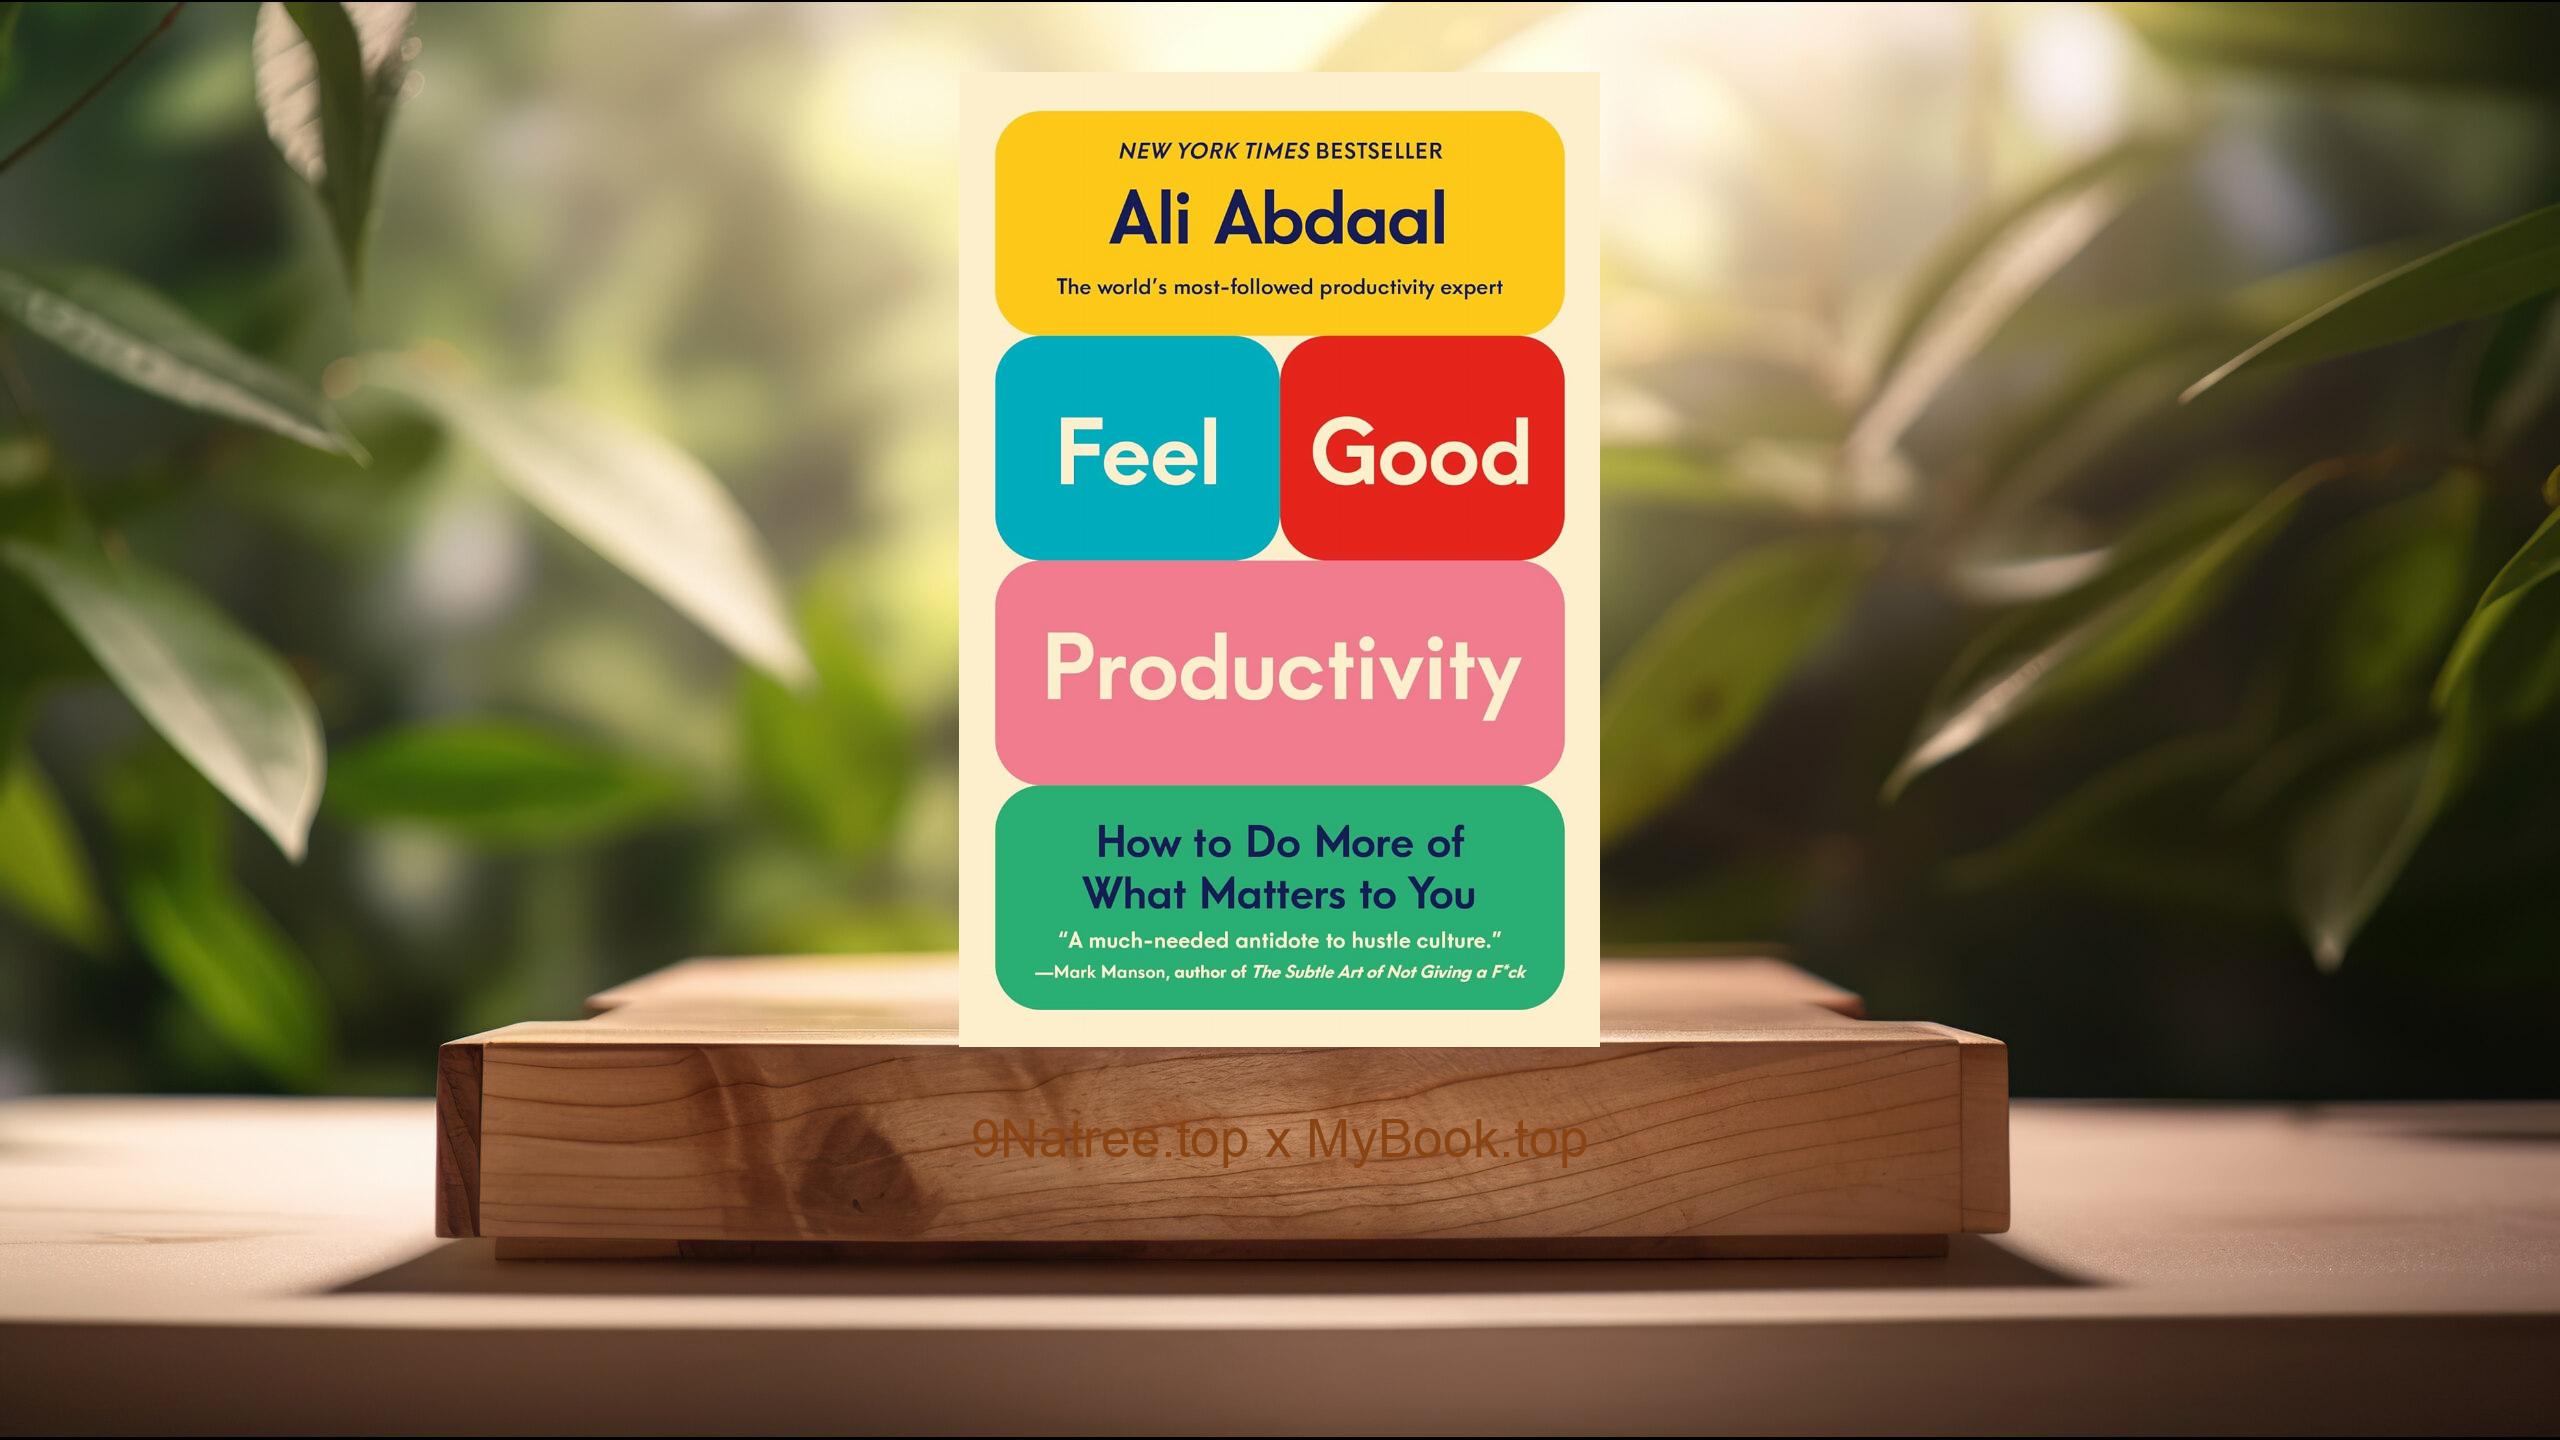 [Review] Feel-Good Productivity: How to Do More of What Matters to You (Ali Abdaal) Summarized